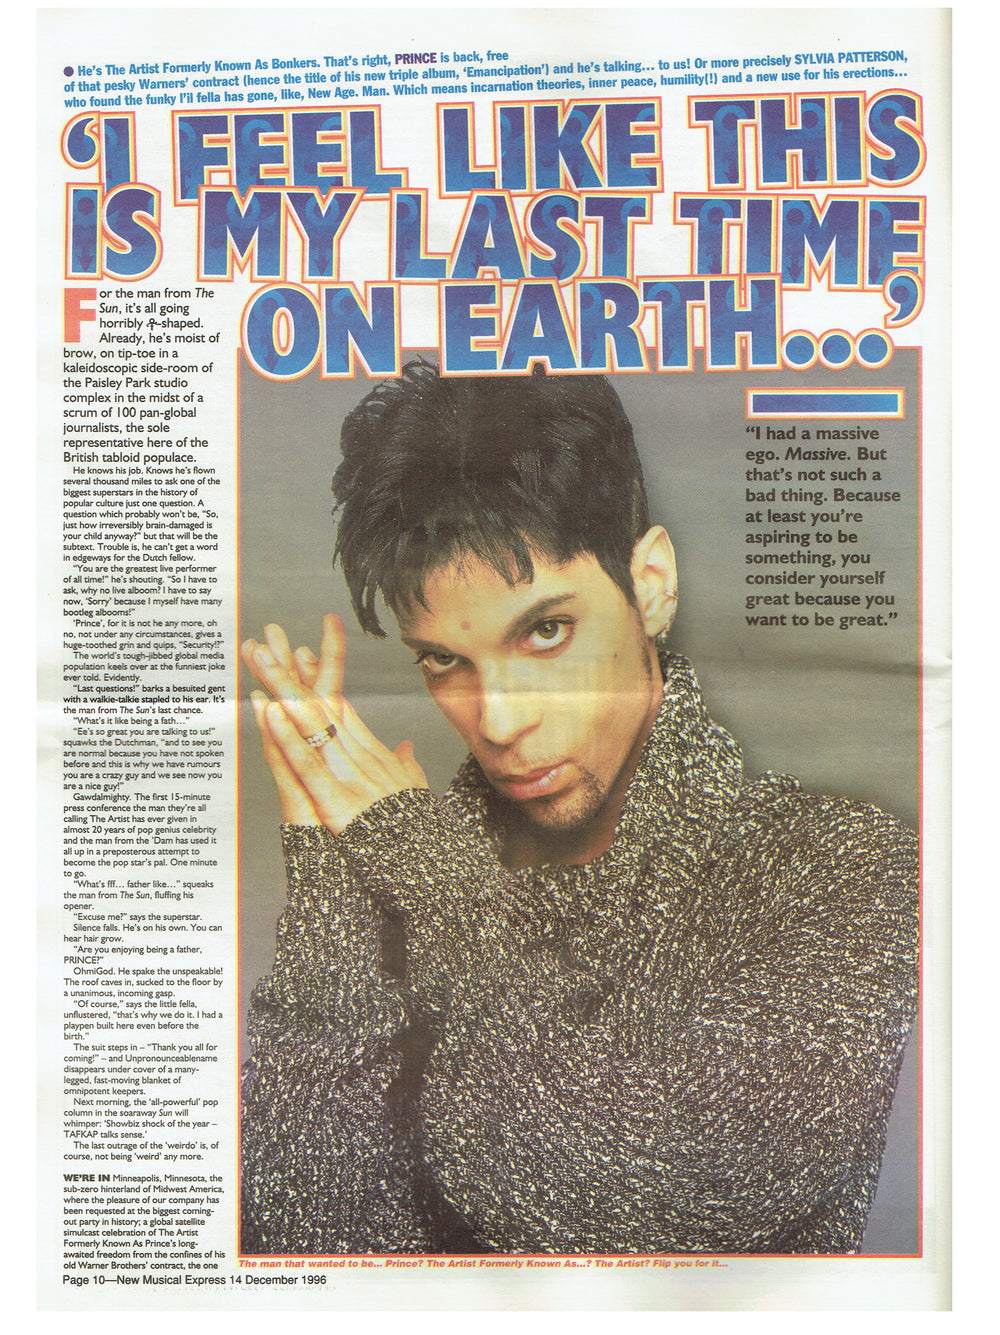 Prince – Newspaper NME COMPLETE December 14 1996 Cover & 3 Page Article Preloved: 1995